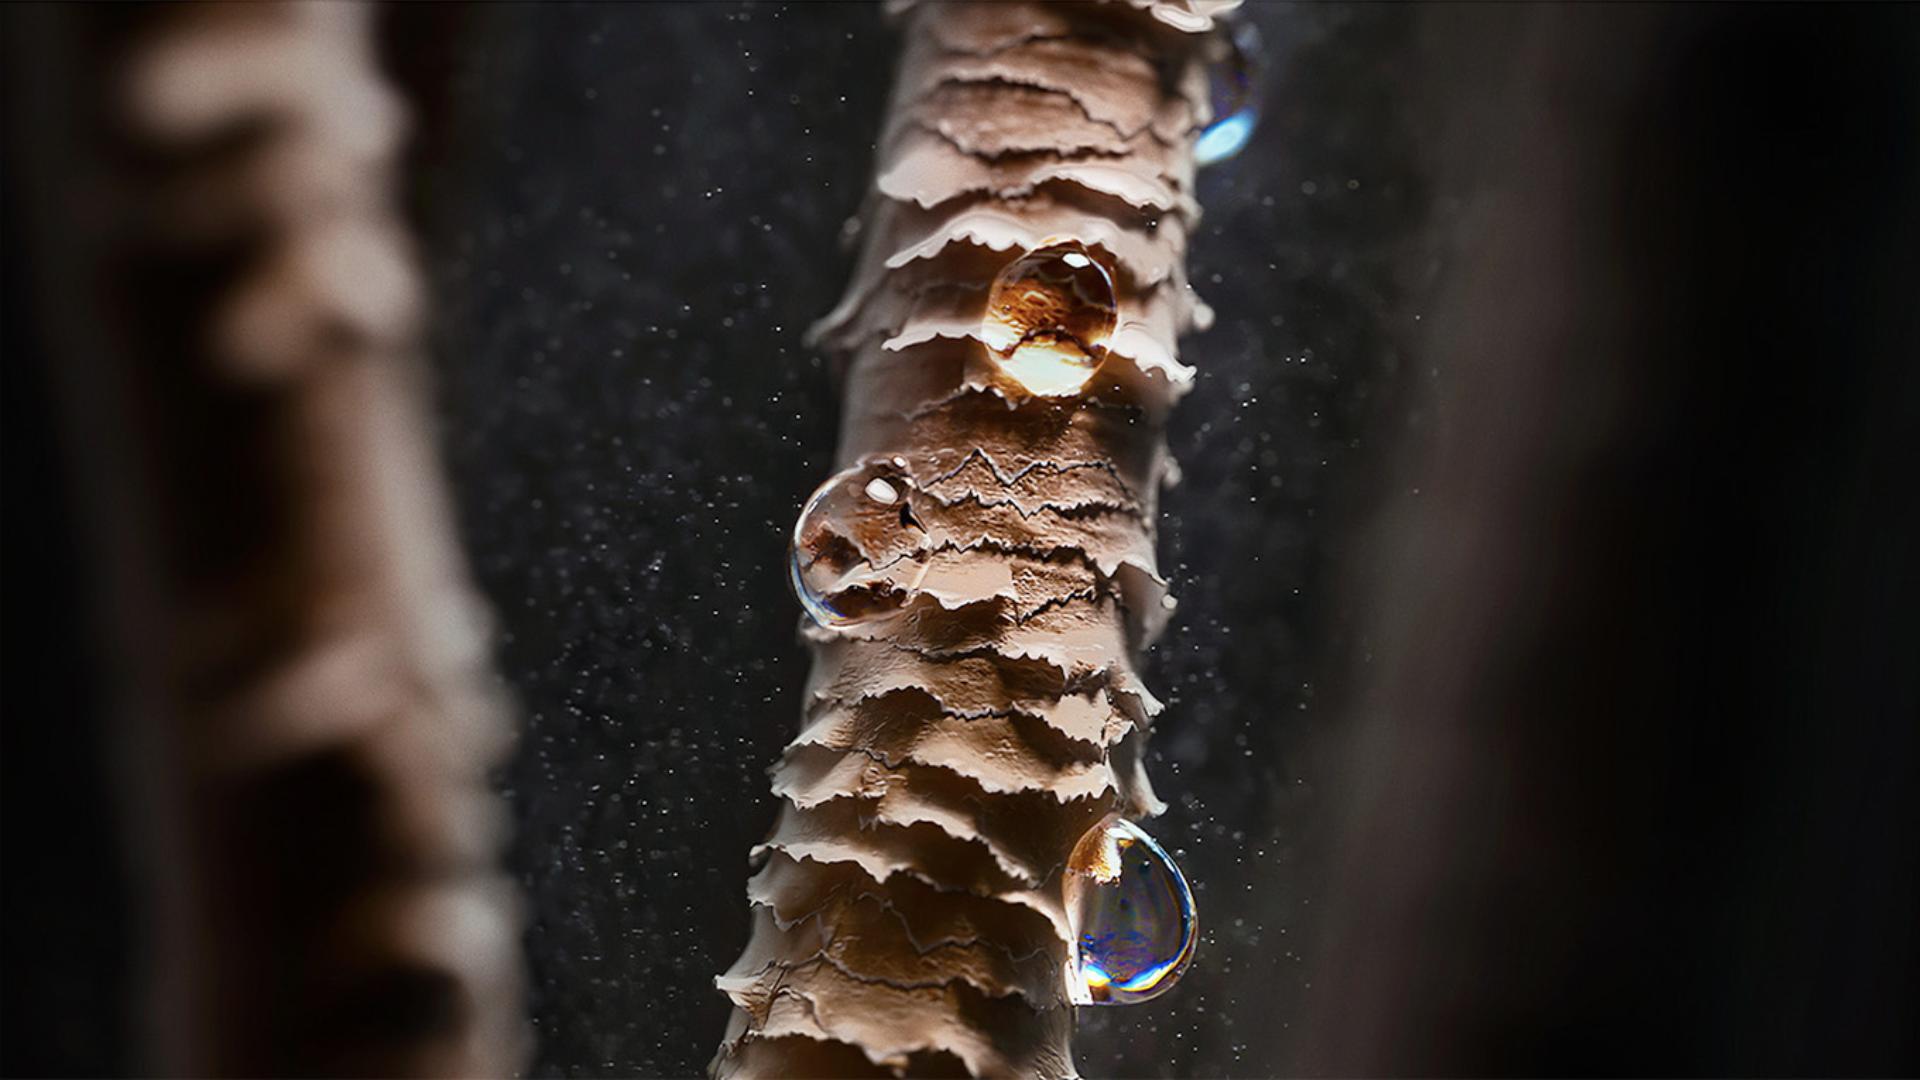 A close-up of damaged hair strands, with water droplets attached.